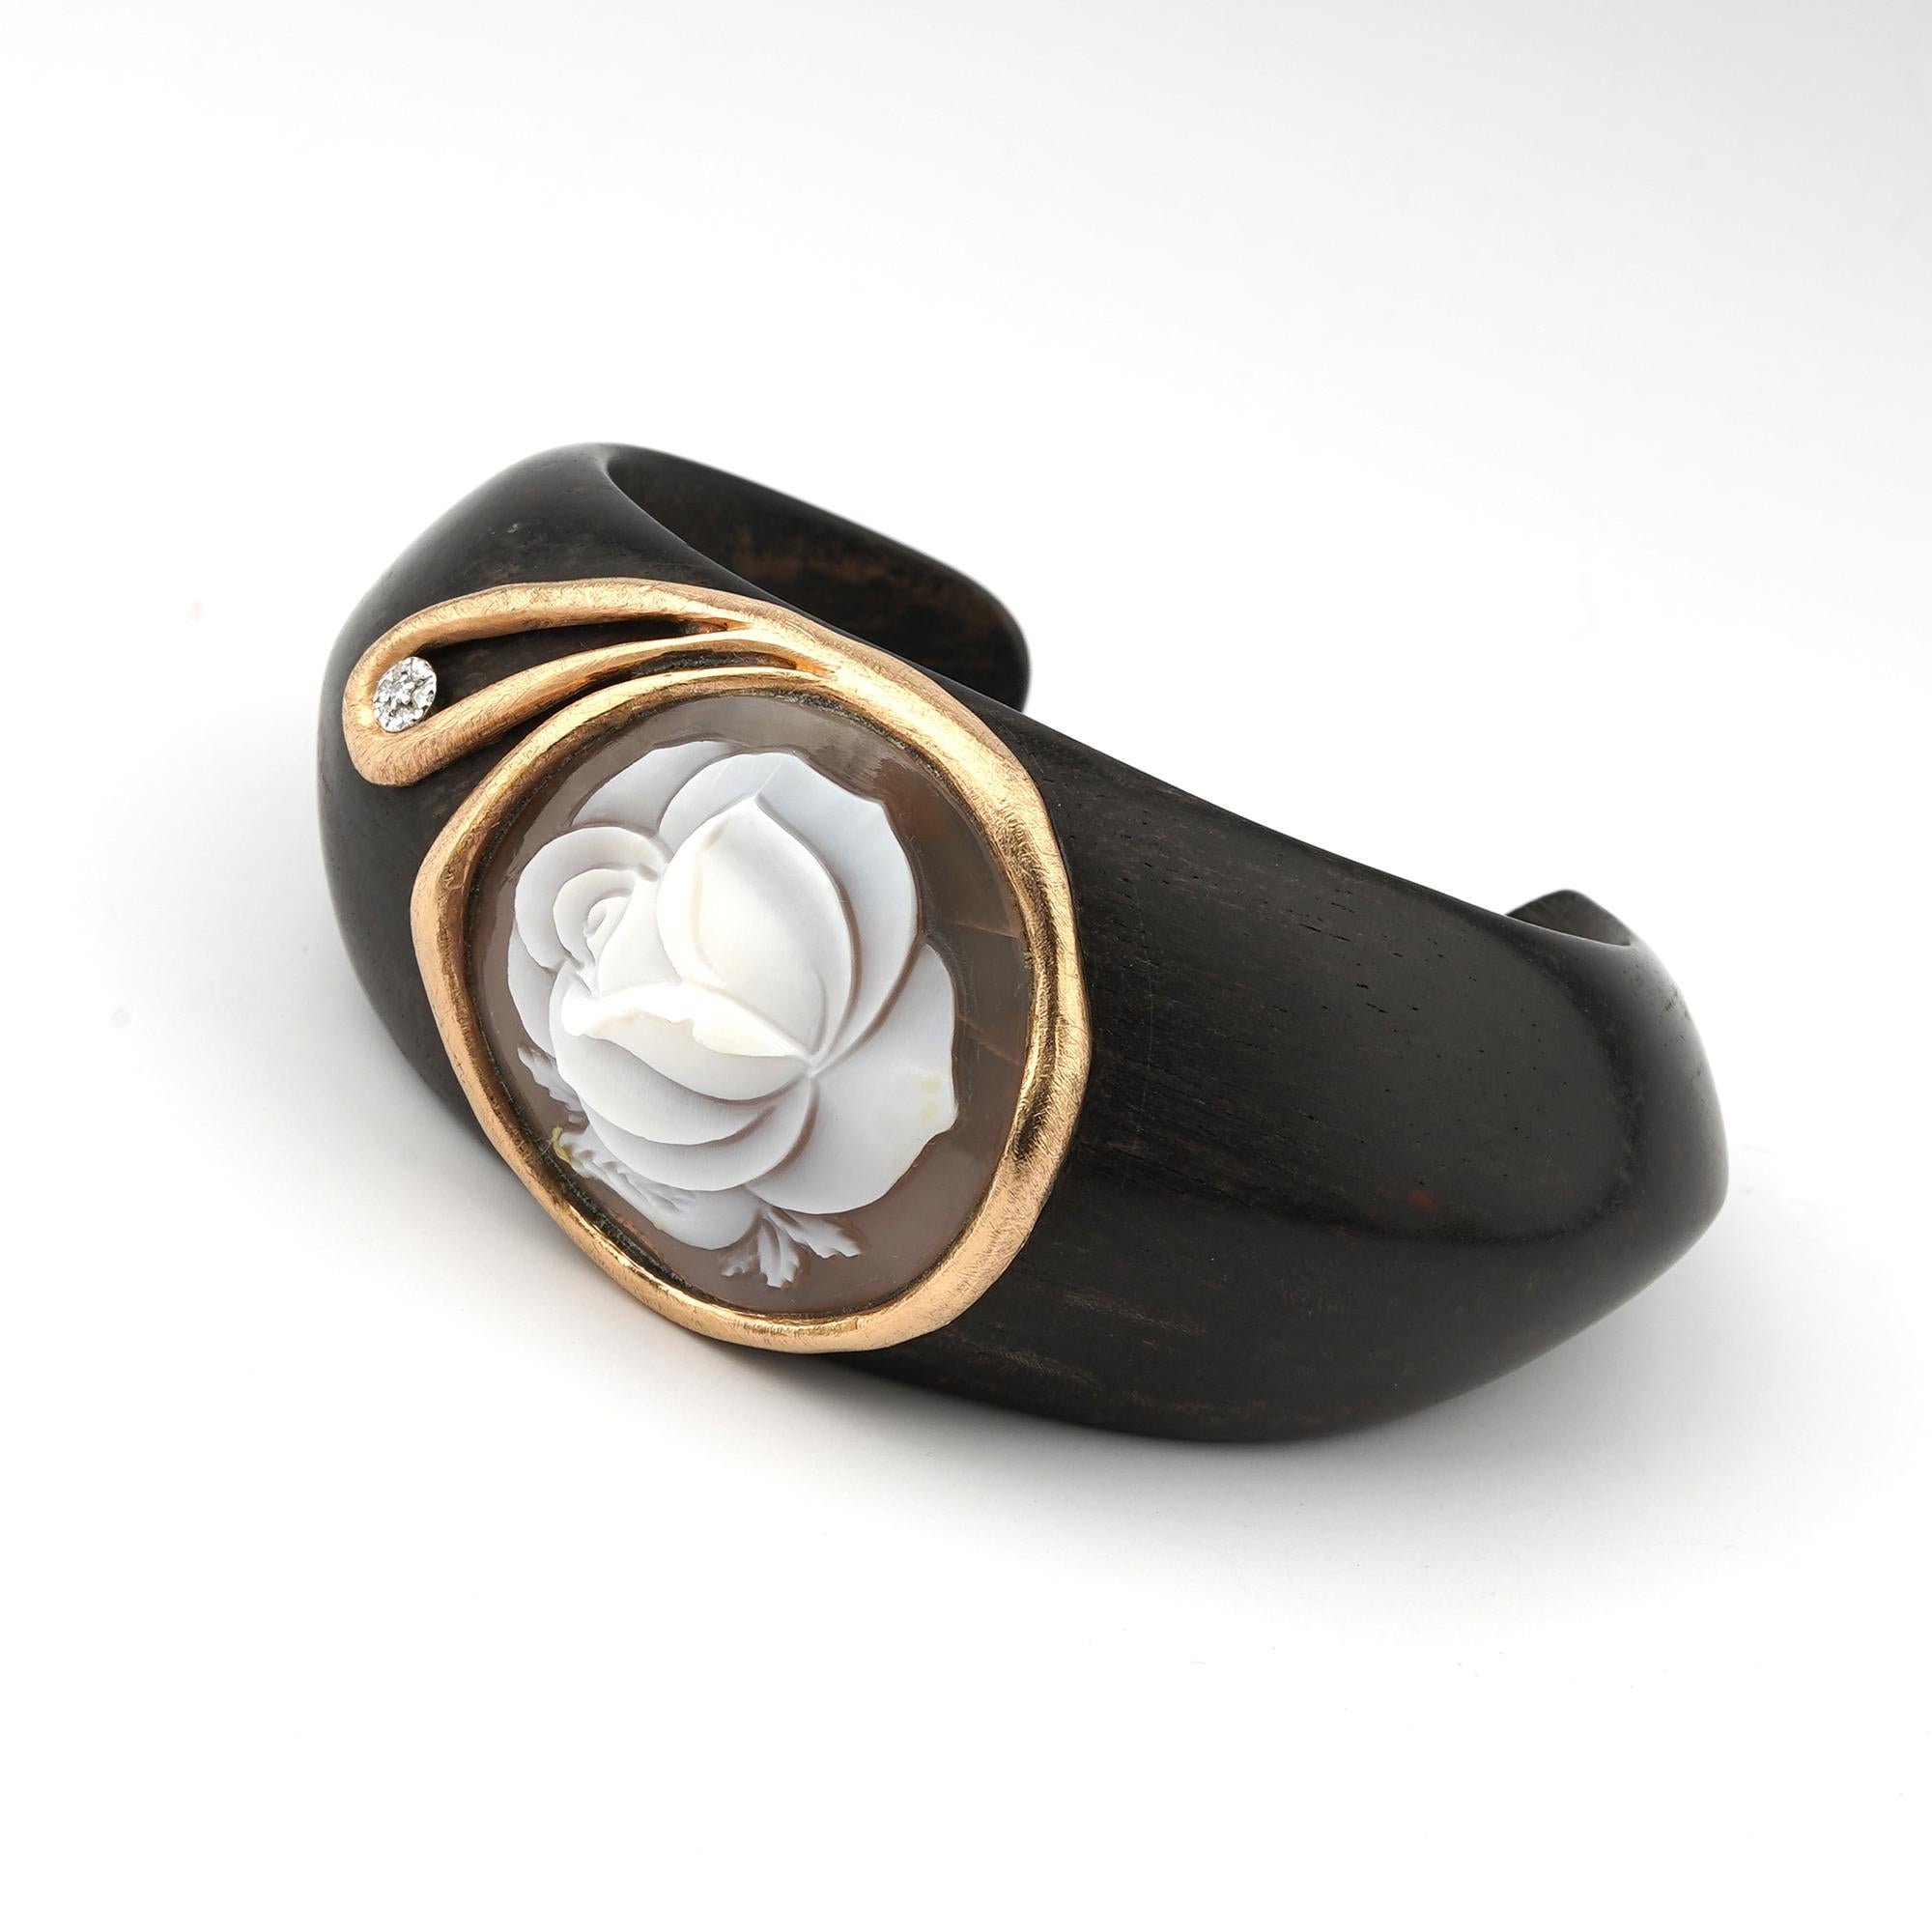 18 carat Gold and Ebony Bracelet with 0,02ct diamonds and 30mm Rose carving Cameo. Exclusive gold jewellery piece made, carved in Ebony, with 18kt gold frame embellished with 0,02ct diamond  and with 30mm long Sea Shell cameo with a Rose Carving.